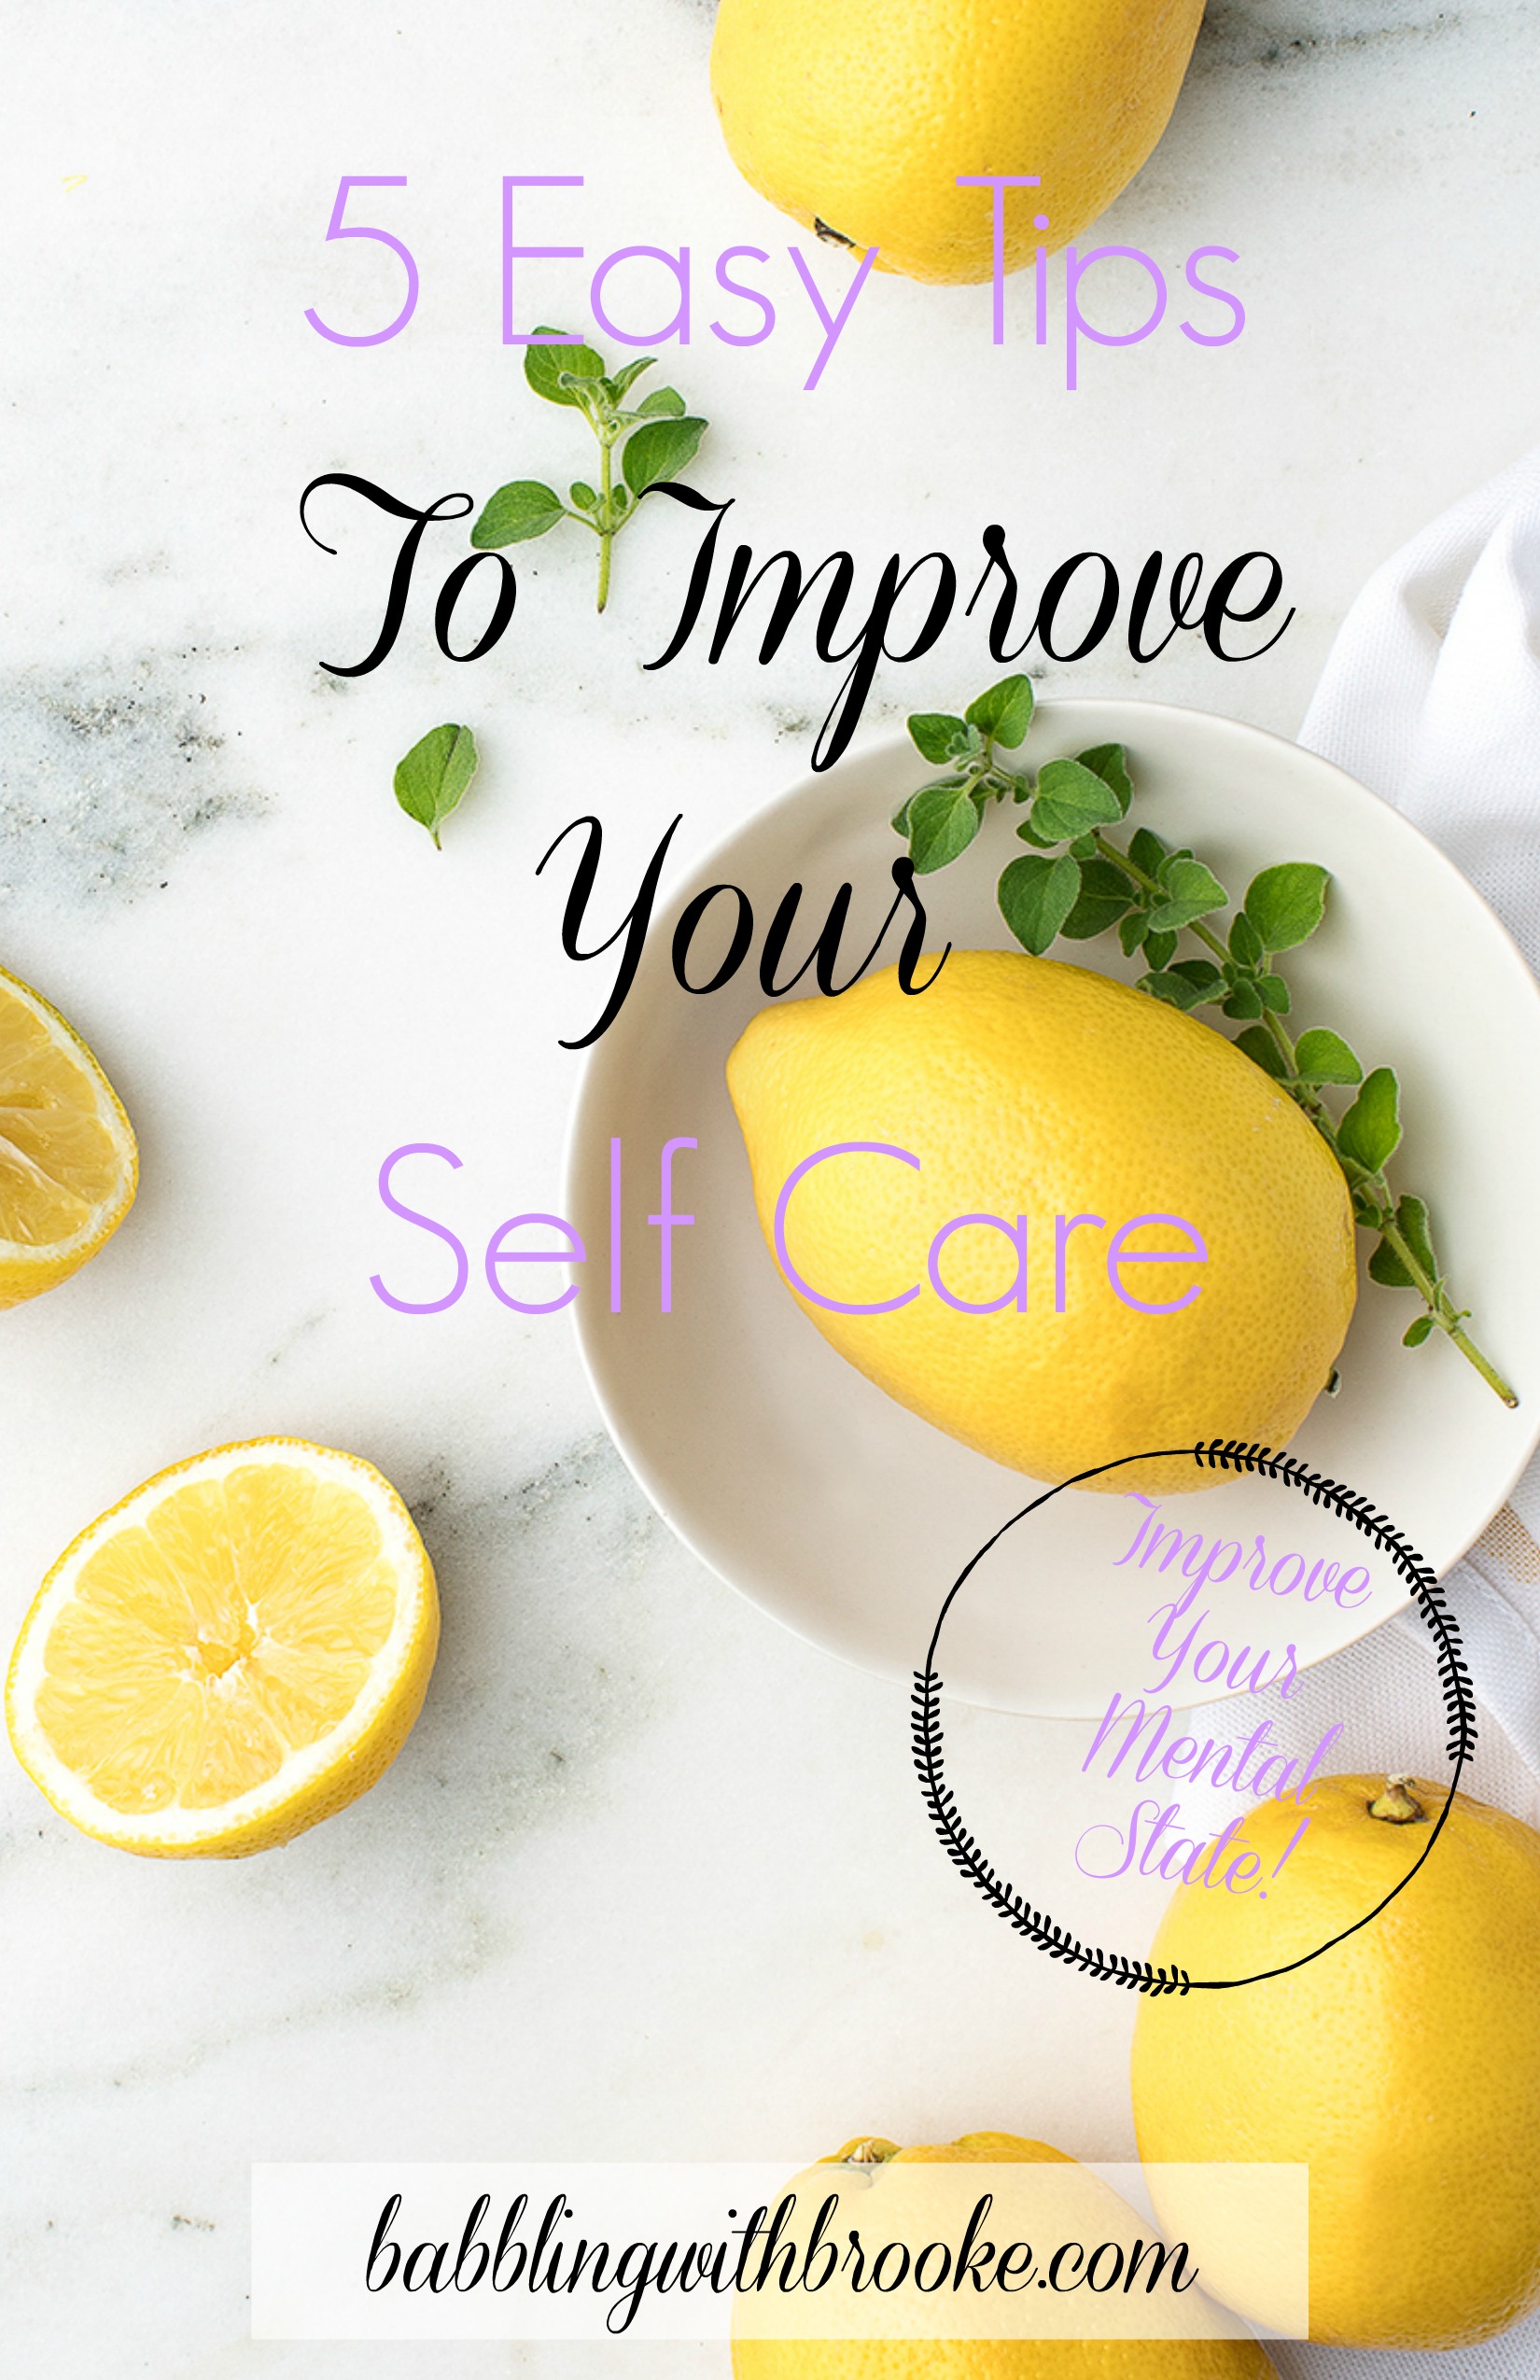 These 5 easy self care ideas will help you feel better emotionally and physically! These easy self care tips can work for anyone! #selfcaretips #selfcareideas #selfcare